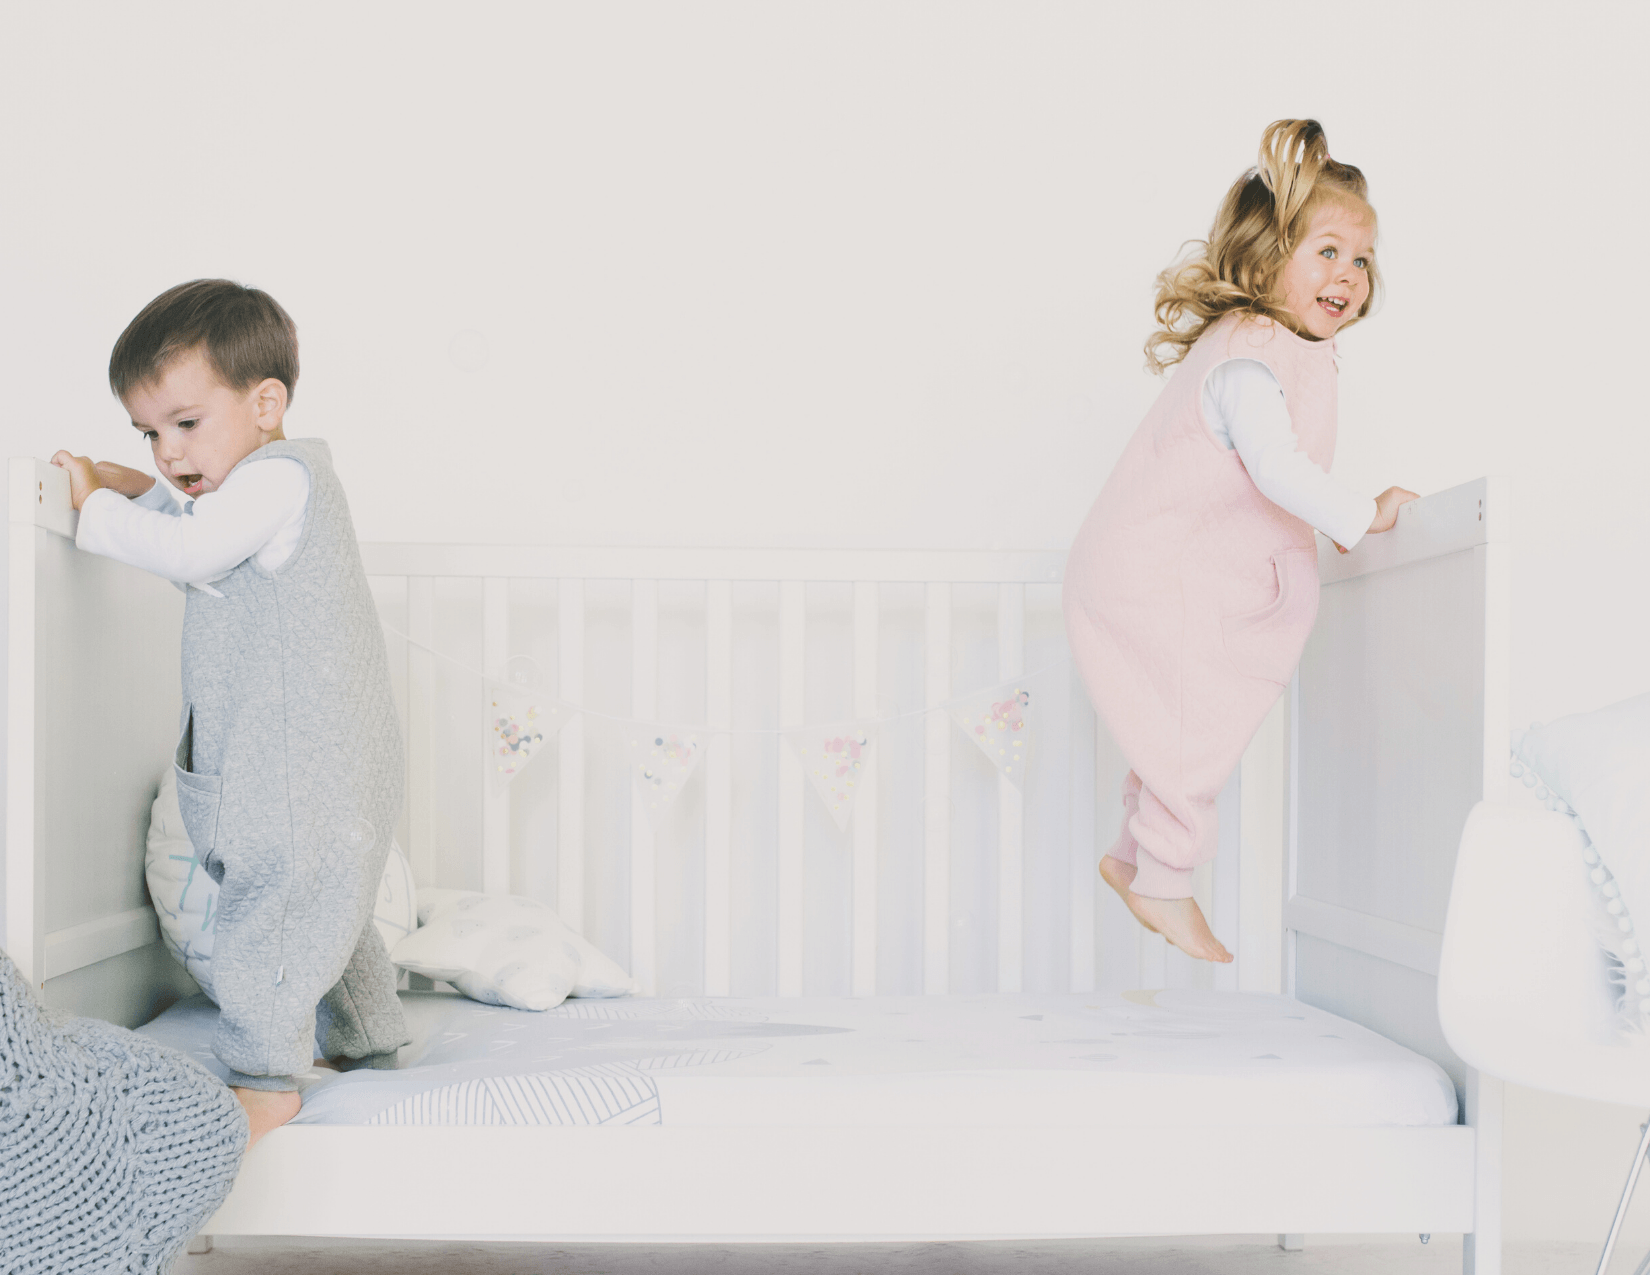 Is Your Toddler Climbing Out Of The Crib?